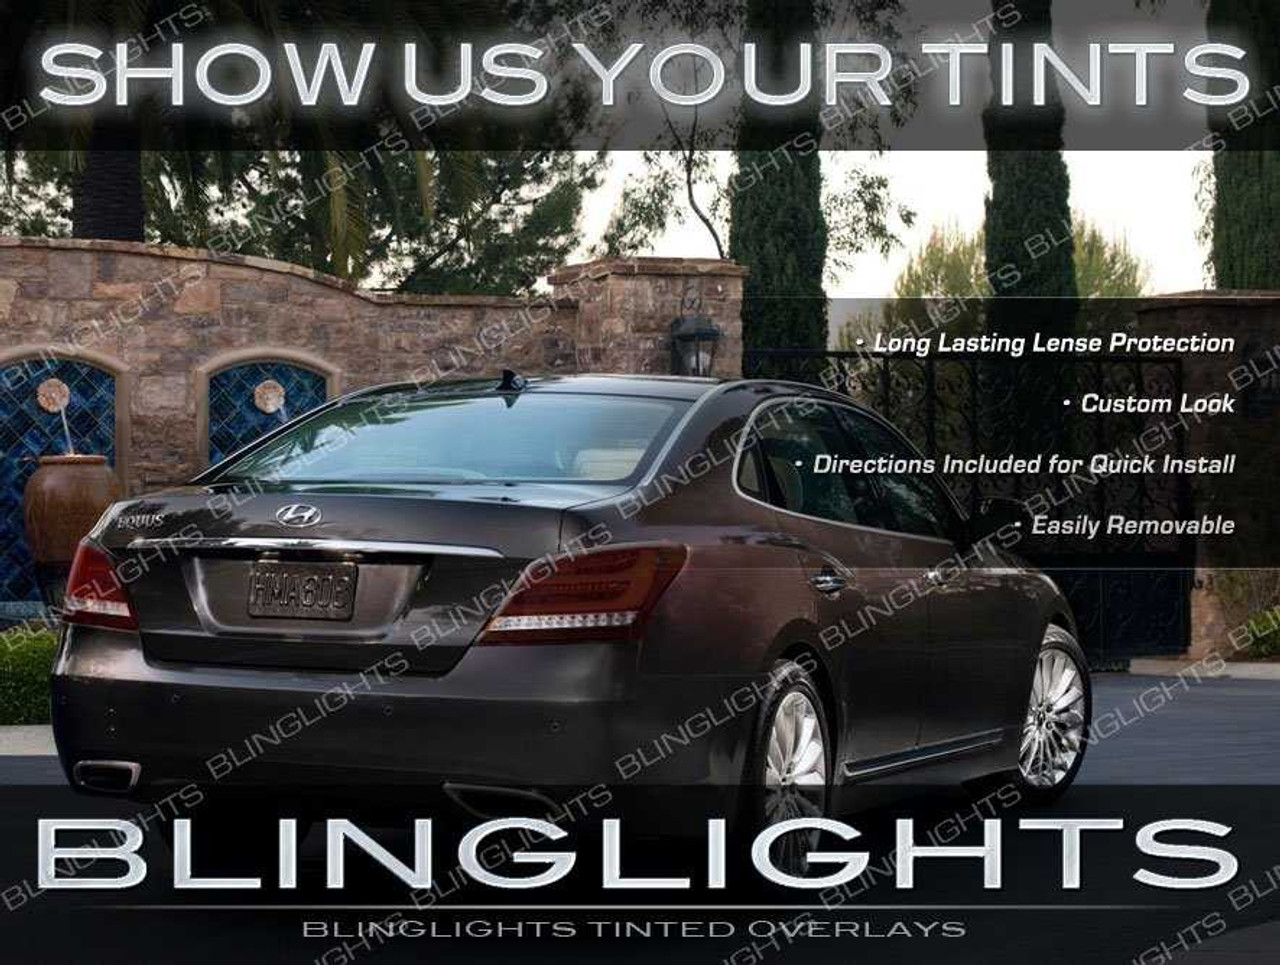 BlingLights Brand Tinted Protective Taillight Film Covers for Hyundai Equus